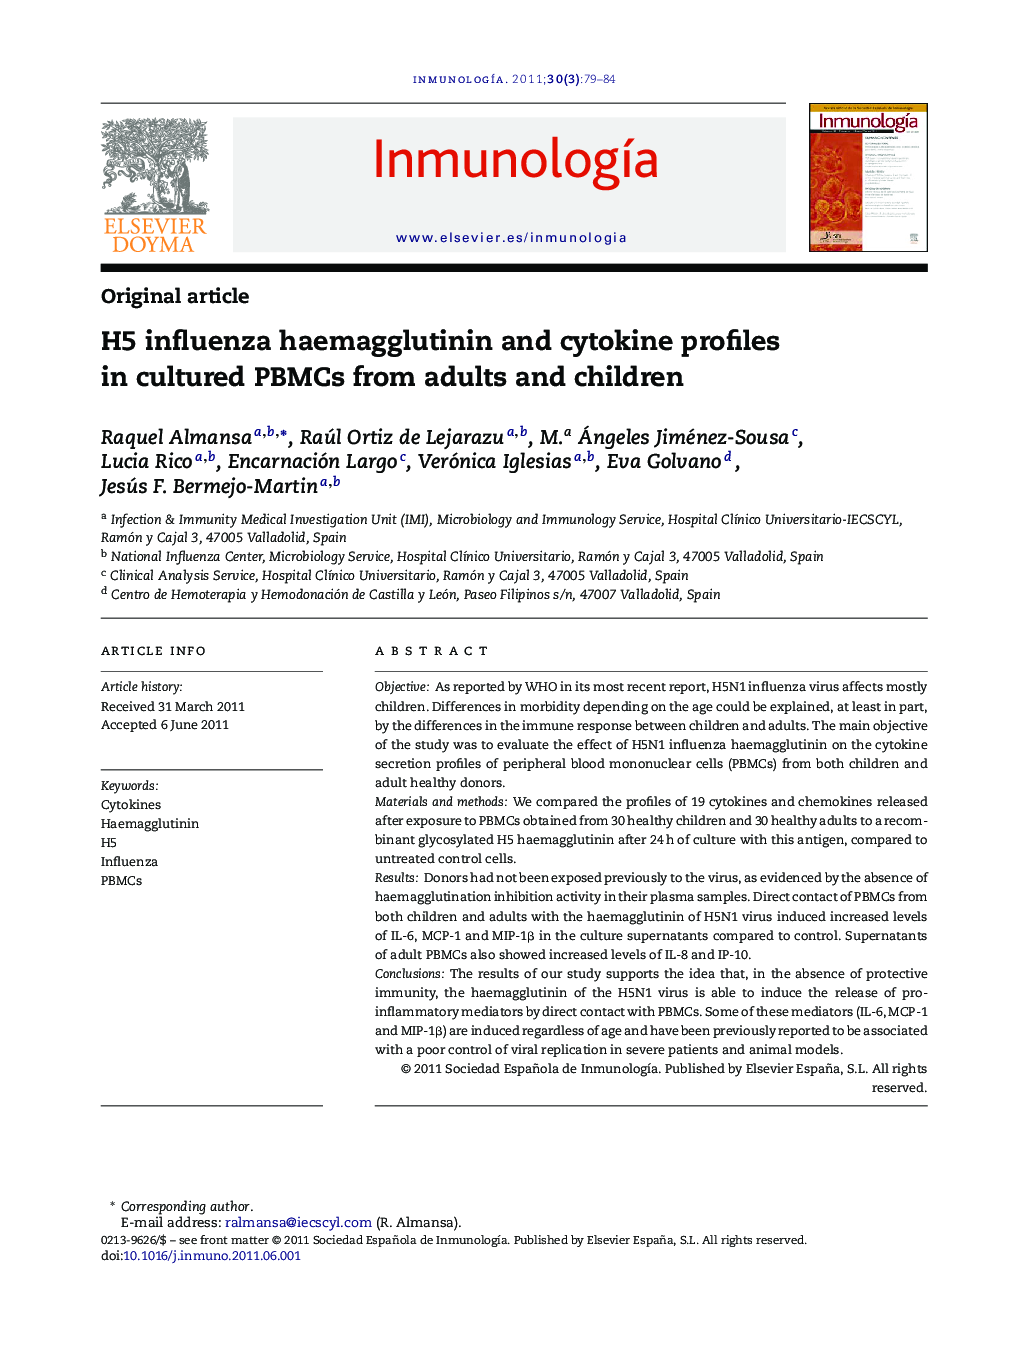 H5 influenza haemagglutinin and cytokine profiles in cultured PBMCs from adults and children